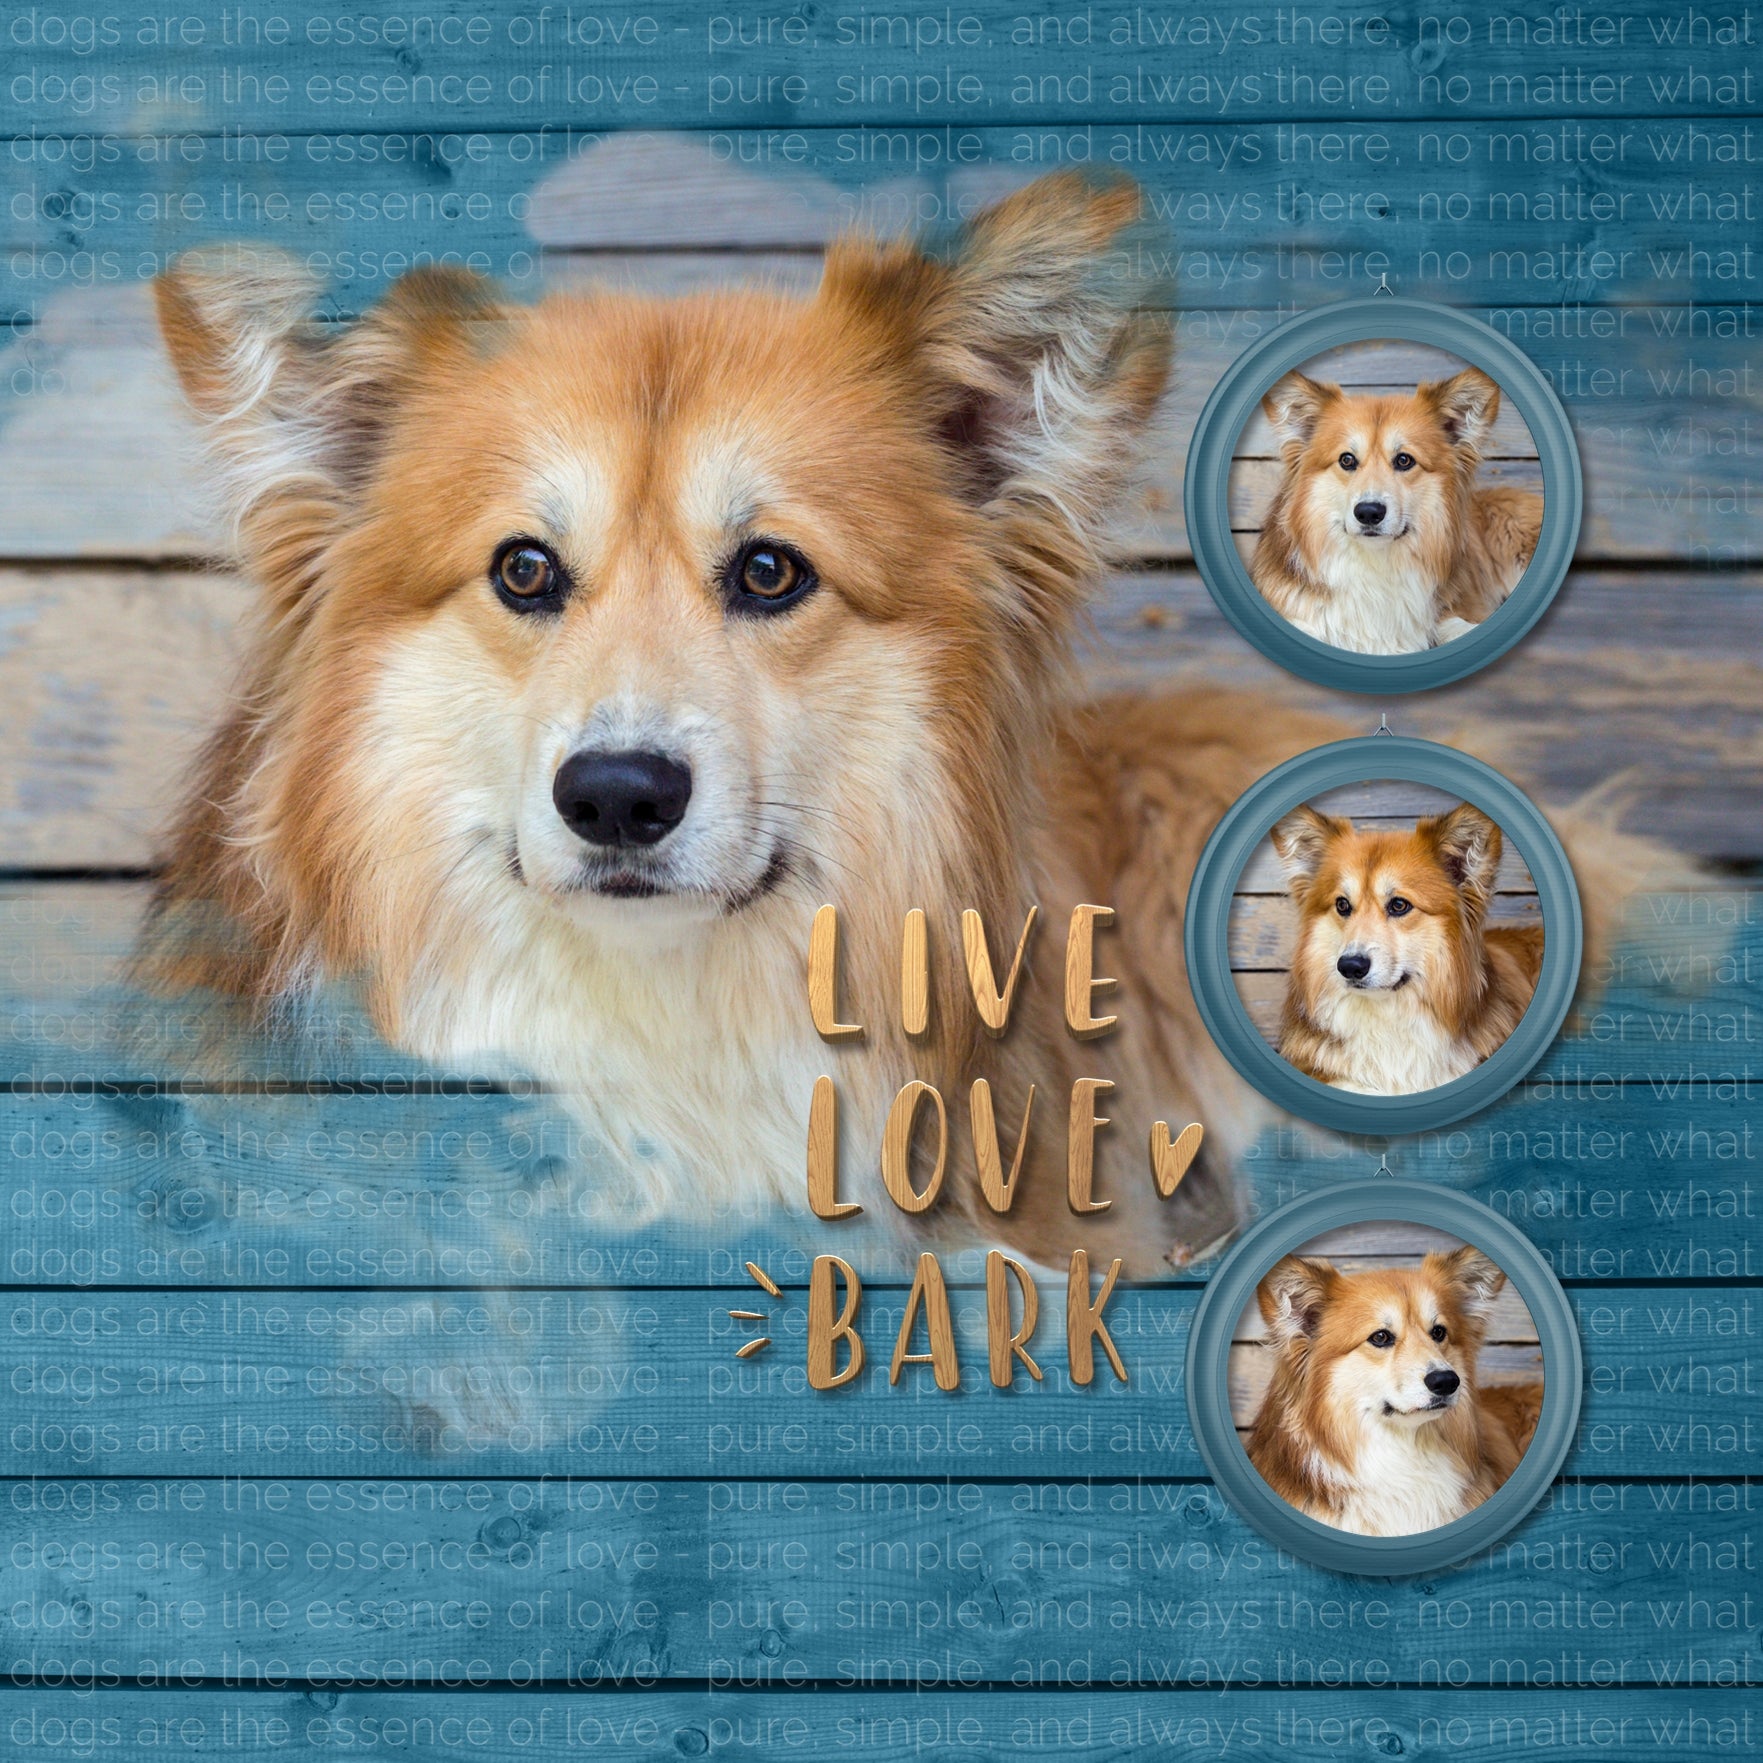 Have fun documenting your favorite dogs with these fun wood word art digital art embellishments by Lucky Girl Creative. Word art includes Always in My Heart, Every Dog Matters, Dog Mama, Adopt a Dog, Woof Woof, All You Need is Woof, Life is Better with a Dog, Home is Where the Dog Is, Dog Cuddler, Stay Pawsitive, and Live Love Bark.